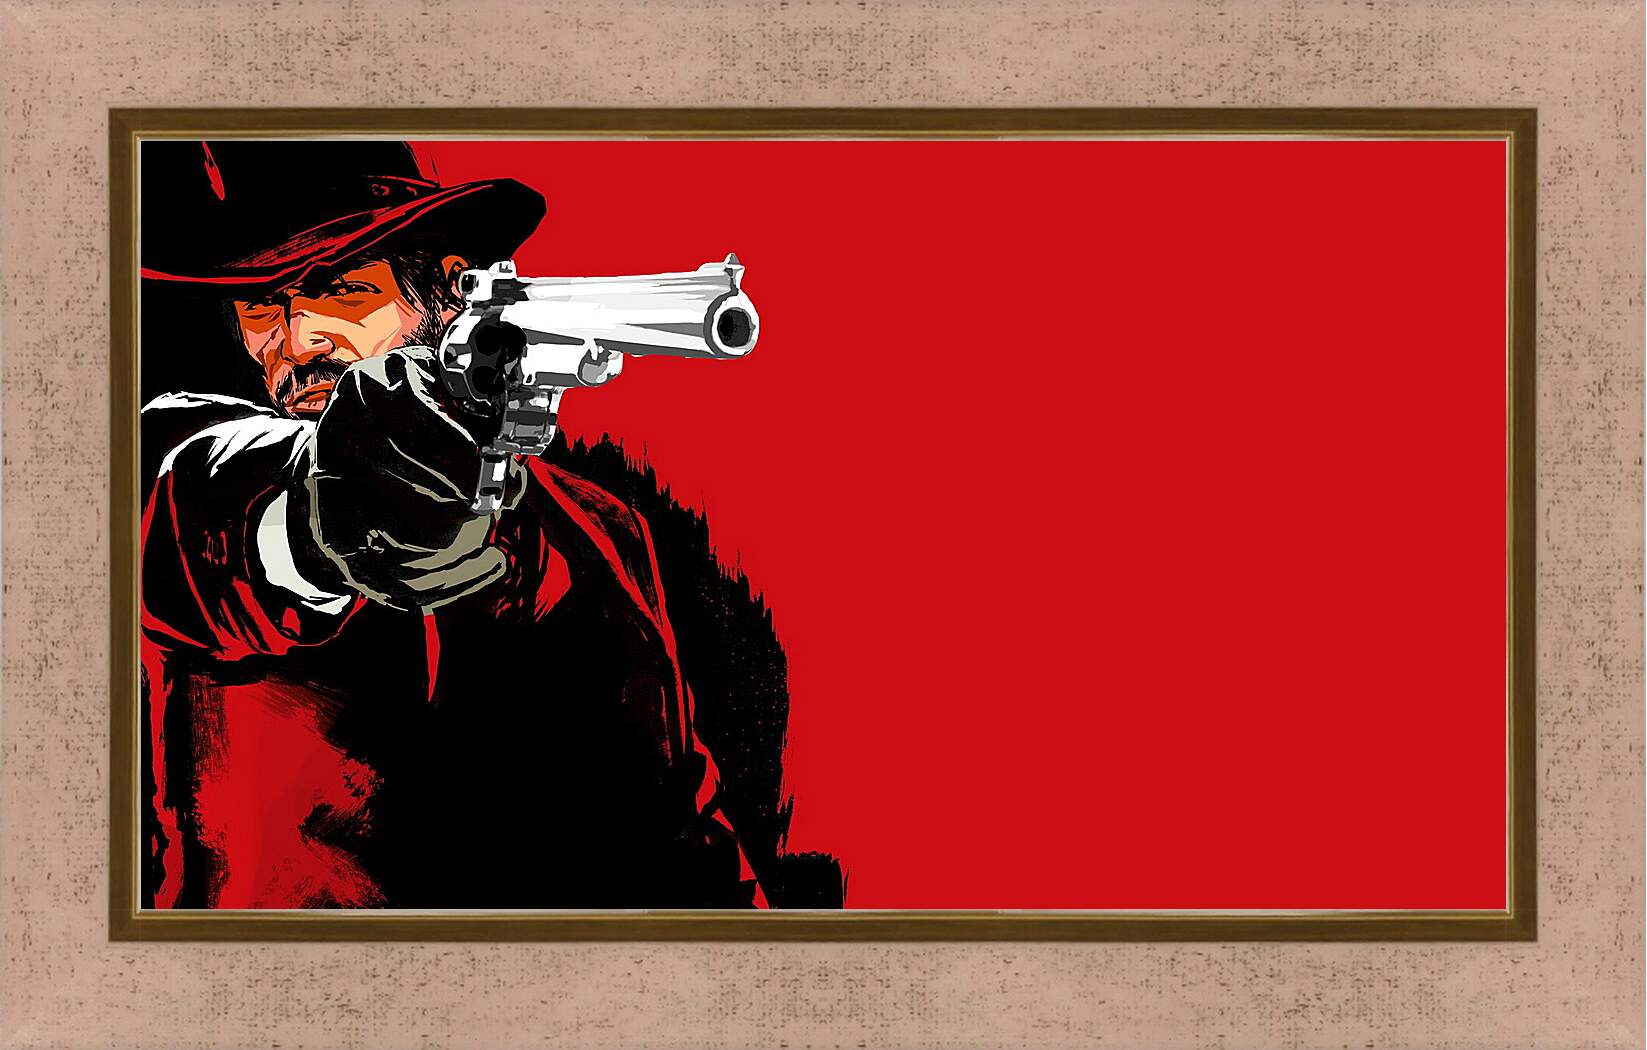 Картина в раме - red dead redemption game, pistol, cowboy
